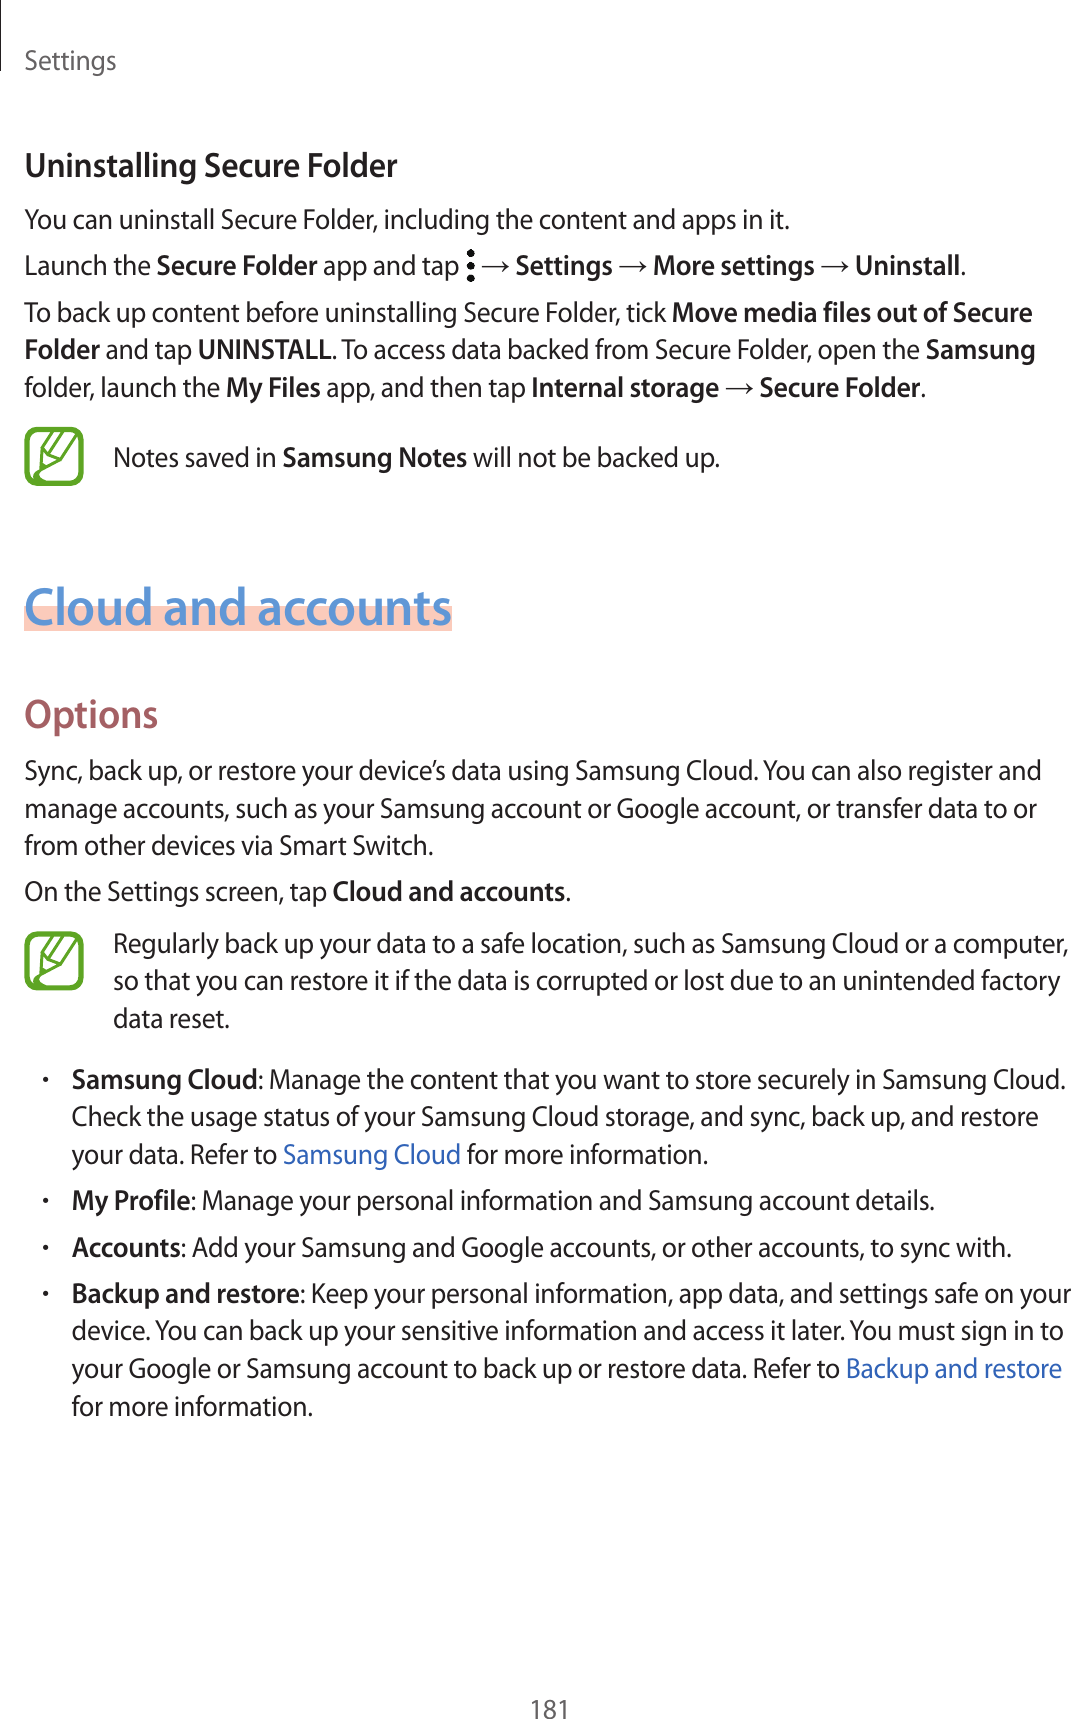 Settings181Uninstalling Secure FolderYou can uninstall Secure Folder, including the content and apps in it.Launch the Secure Folder app and tap   → Settings → More settings → Uninstall.To back up content before uninstalling Secure Folder, tick Move media files out of Secure Folder and tap UNINSTALL. To access data backed from Secure Folder, open the Samsung folder, launch the My Files app, and then tap Internal storage → Secure Folder.Notes saved in Samsung Notes will not be backed up.Cloud and accountsOptionsSync, back up, or restore your device’s data using Samsung Cloud. You can also register and manage accounts, such as your Samsung account or Google account, or transfer data to or from other devices via Smart Switch.On the Settings screen, tap Cloud and accounts.Regularly back up your data to a safe location, such as Samsung Cloud or a computer, so that you can restore it if the data is corrupted or lost due to an unintended factory data reset.•Samsung Cloud: Manage the content that you want to store securely in Samsung Cloud. Check the usage status of your Samsung Cloud storage, and sync, back up, and restore your data. Refer to Samsung Cloud for more information.•My Profile: Manage your personal information and Samsung account details.•Accounts: Add your Samsung and Google accounts, or other accounts, to sync with.•Backup and restore: Keep your personal information, app data, and settings safe on your device. You can back up your sensitive information and access it later. You must sign in to your Google or Samsung account to back up or restore data. Refer to Backup and restore for more information.